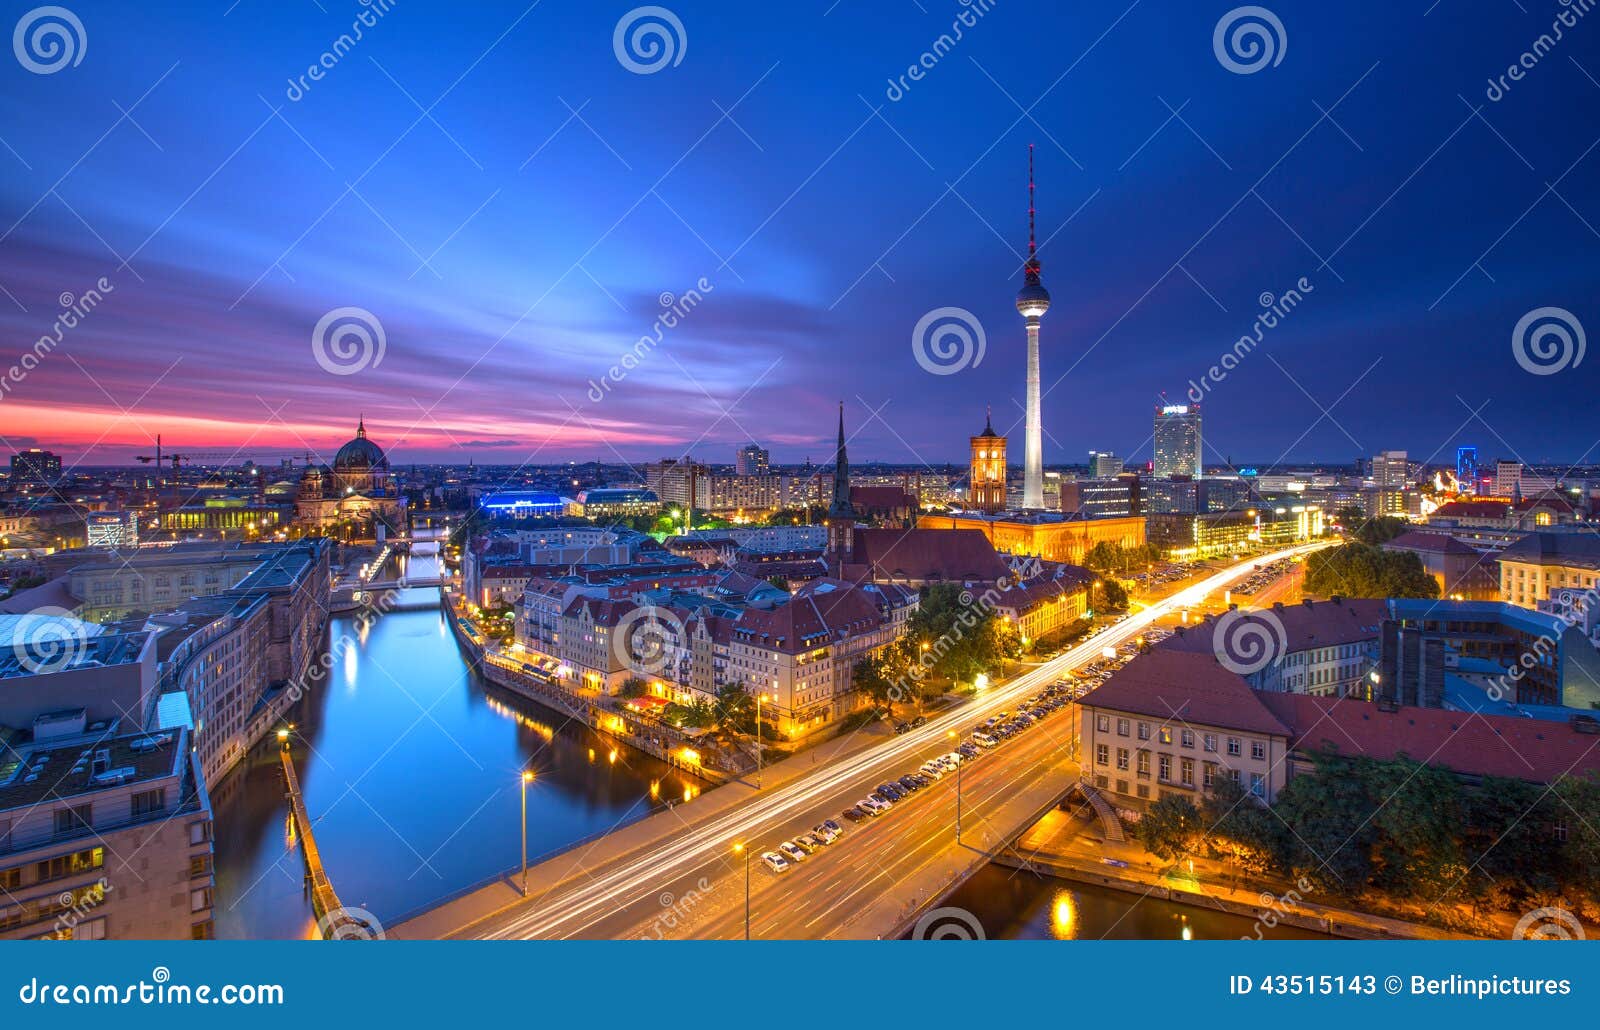 berlin skyline city panorama with blue sky sunset and traffic - famous landmark in berlin, germany, europe